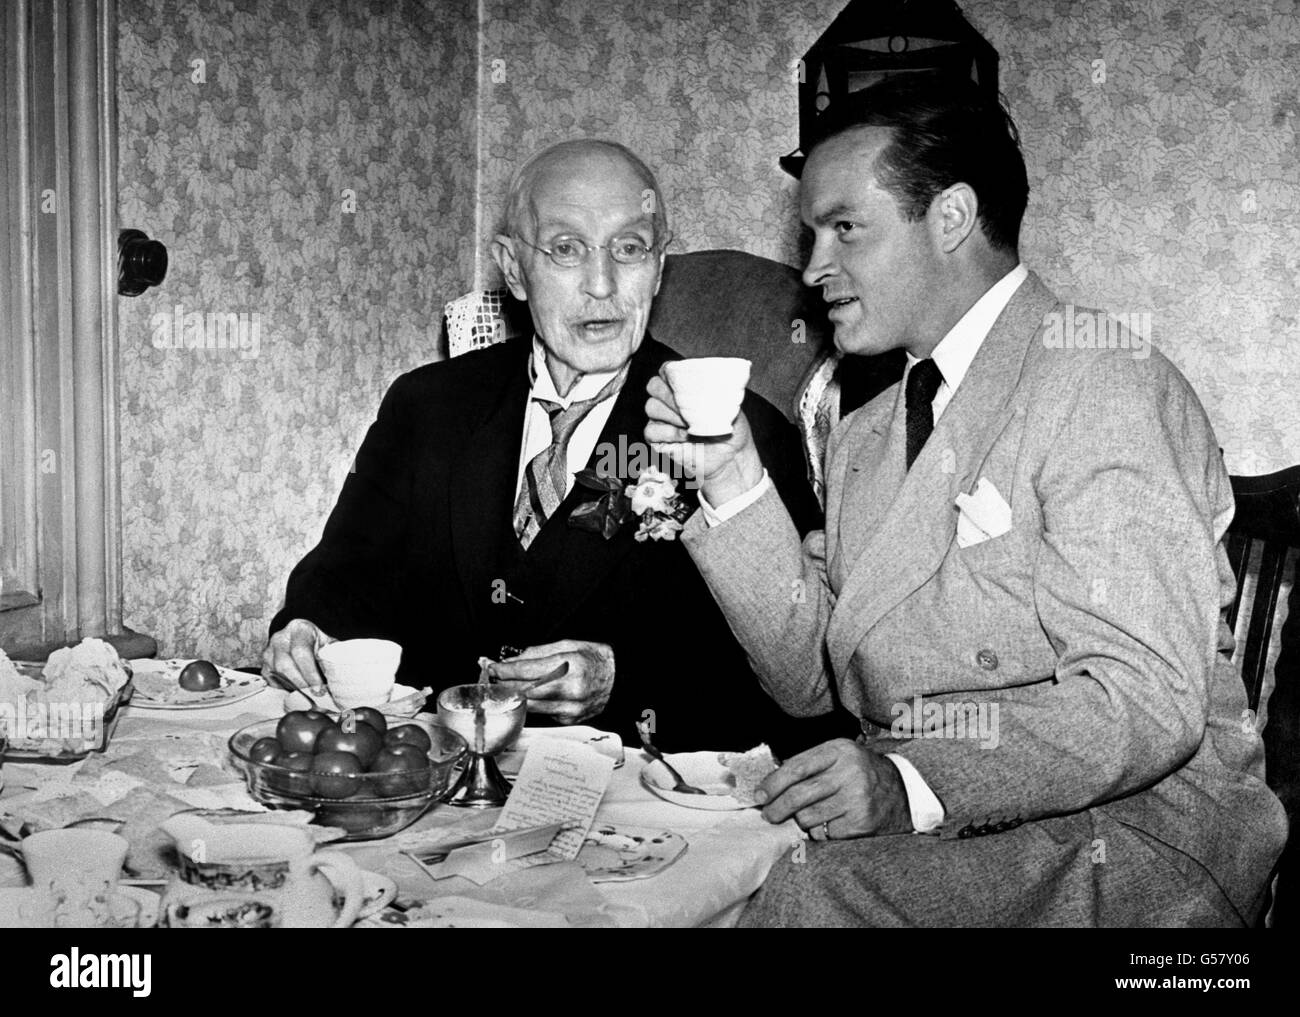 World war ii entertainment Black and White Stock Photos & Images - Alamy